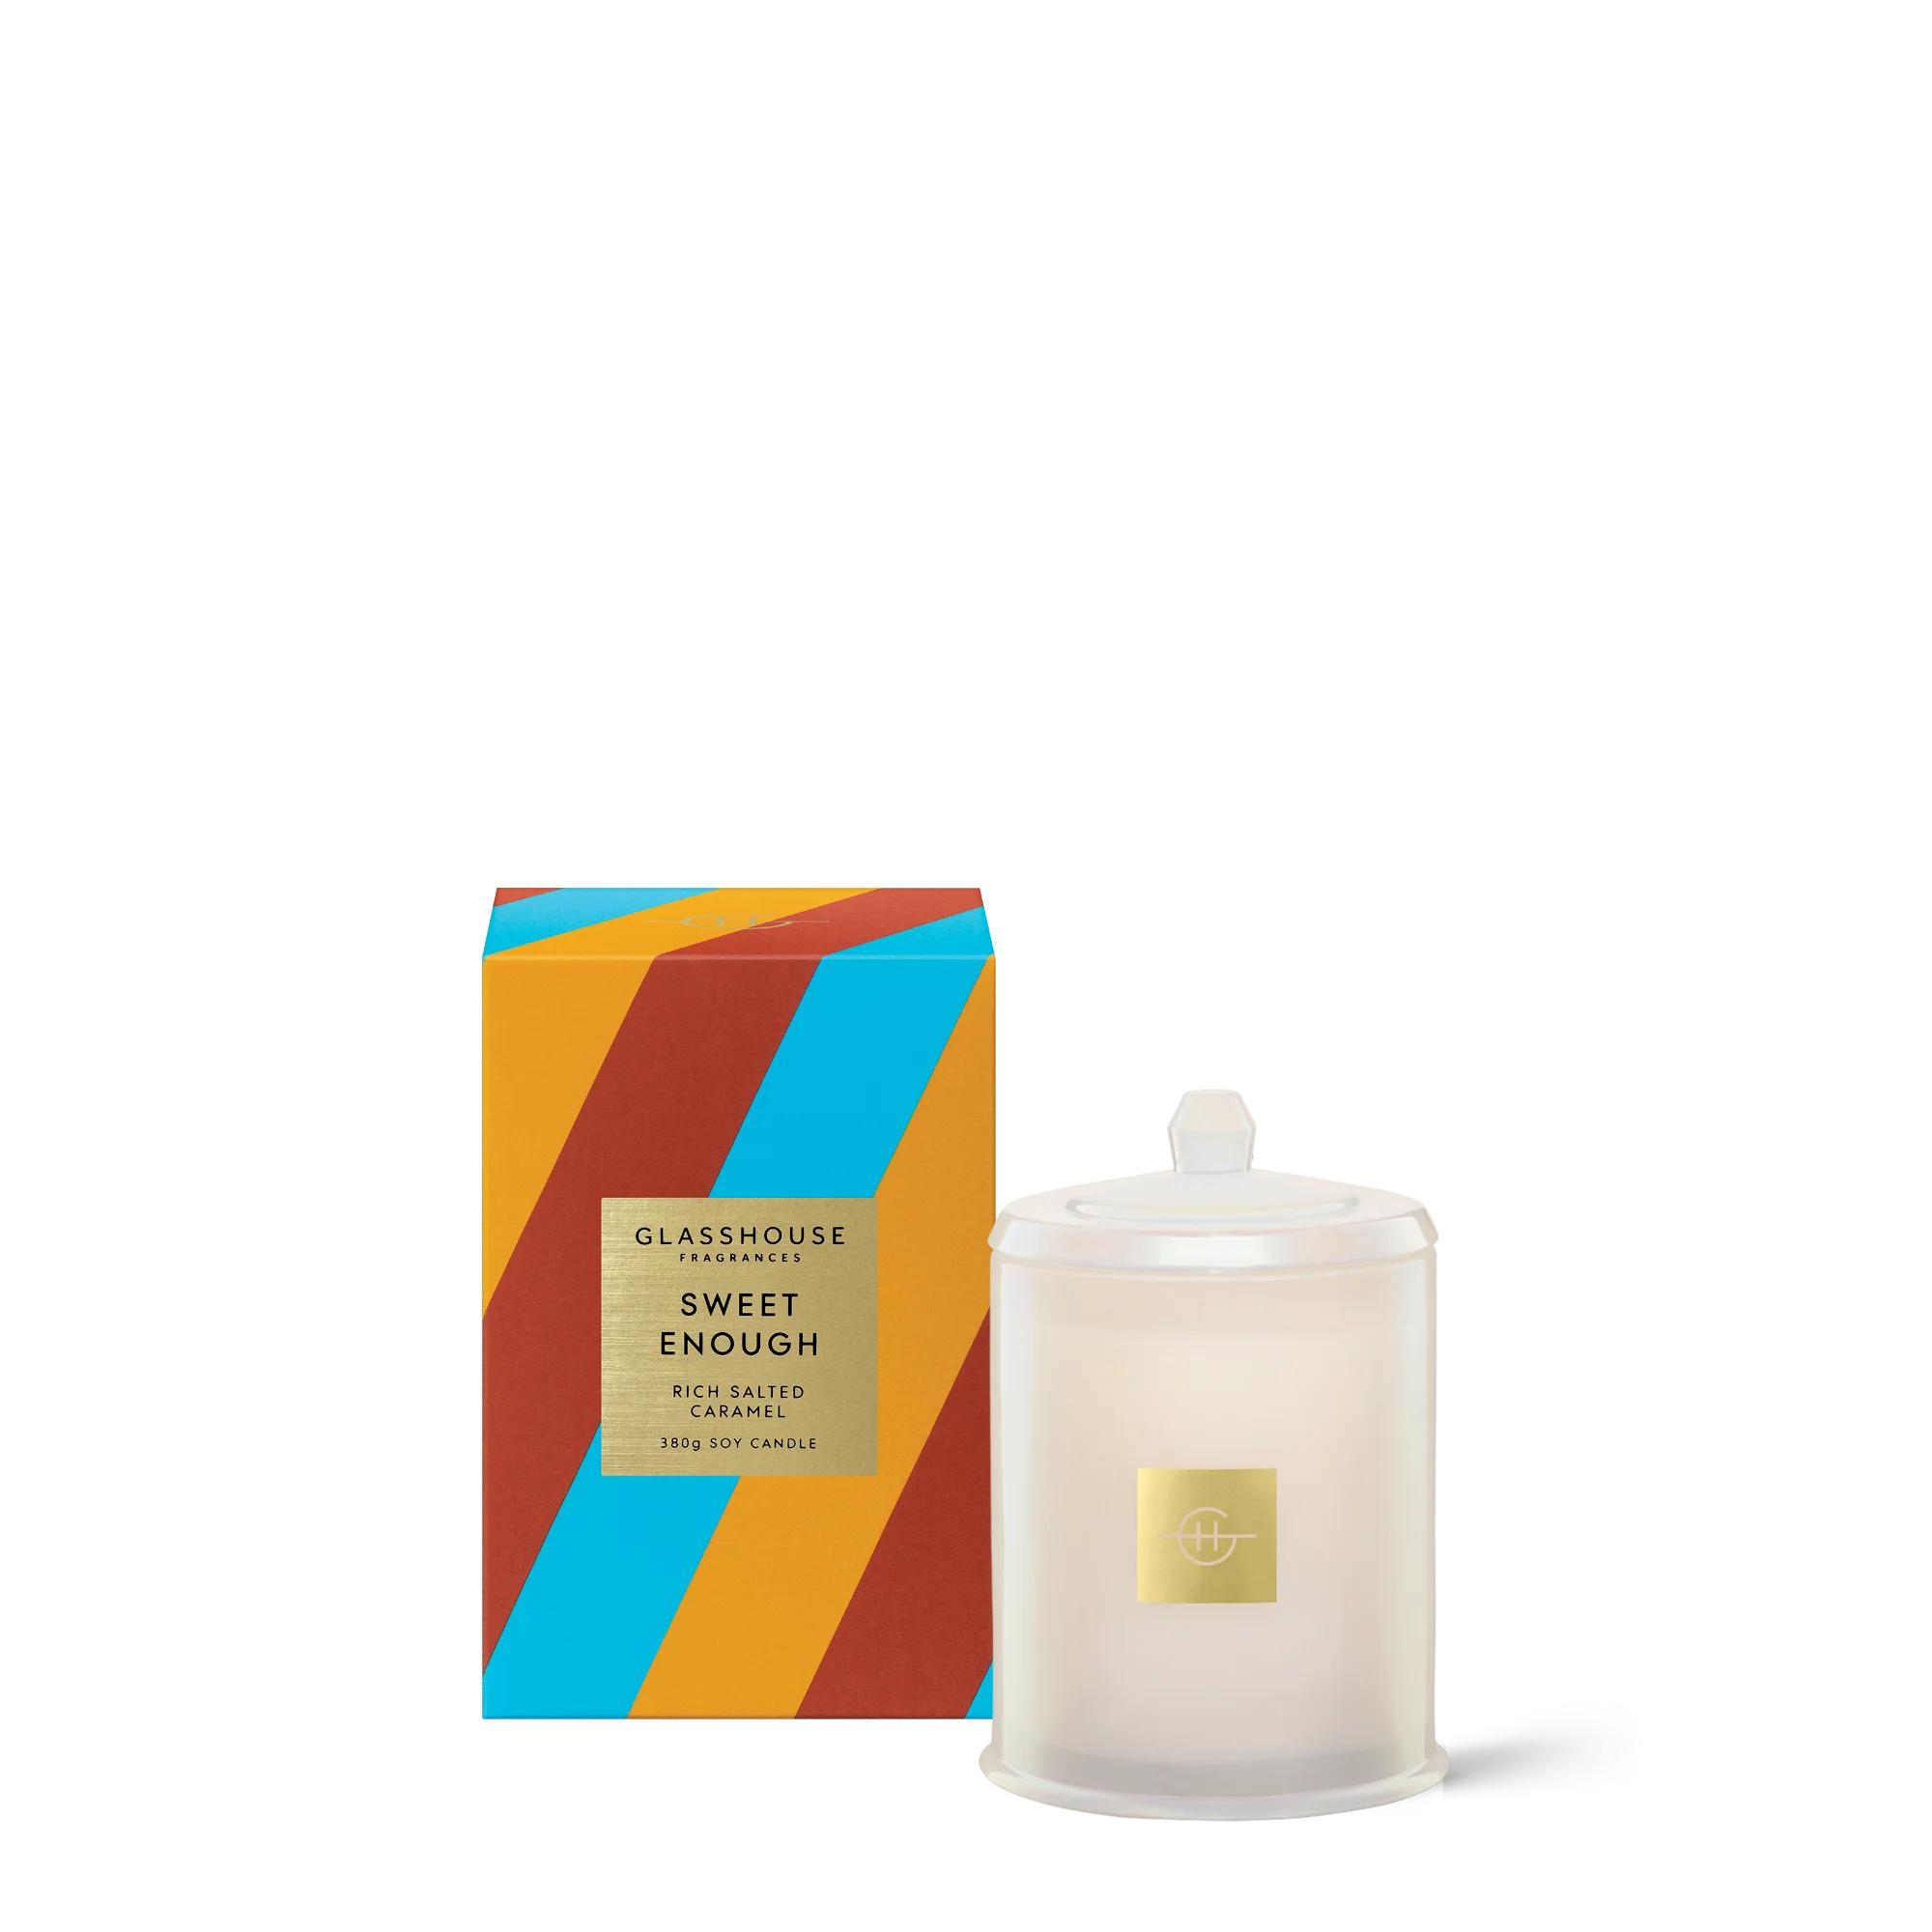 Glasshouse SWEET ENOUGH Limited Edition Candle 380g